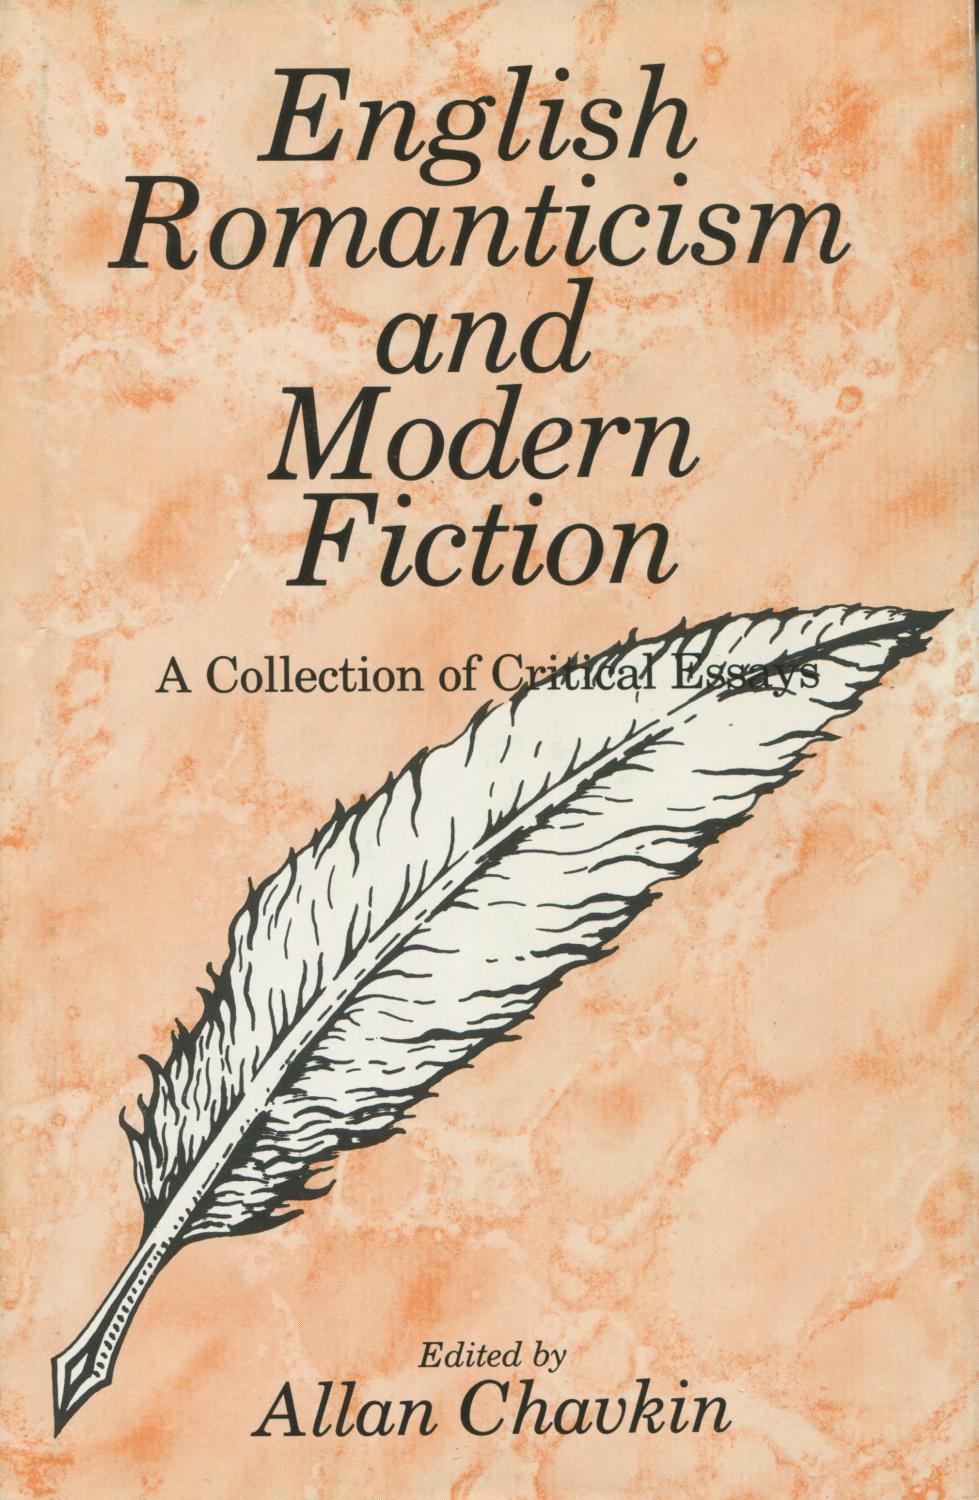 English Romanticism And Modern Fiction: A Collection of Critical Essays (Studies in Modern Literature, No. 21) - Chavkin, Allan (editor)